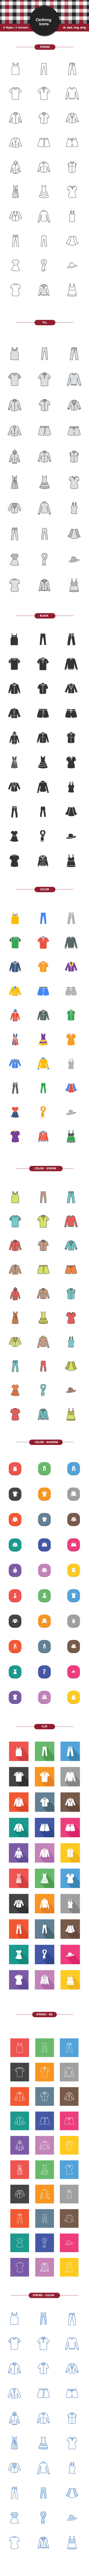 Freebie: Clothing Icons (9 Styles, AI, EPS, SVG, PNG)